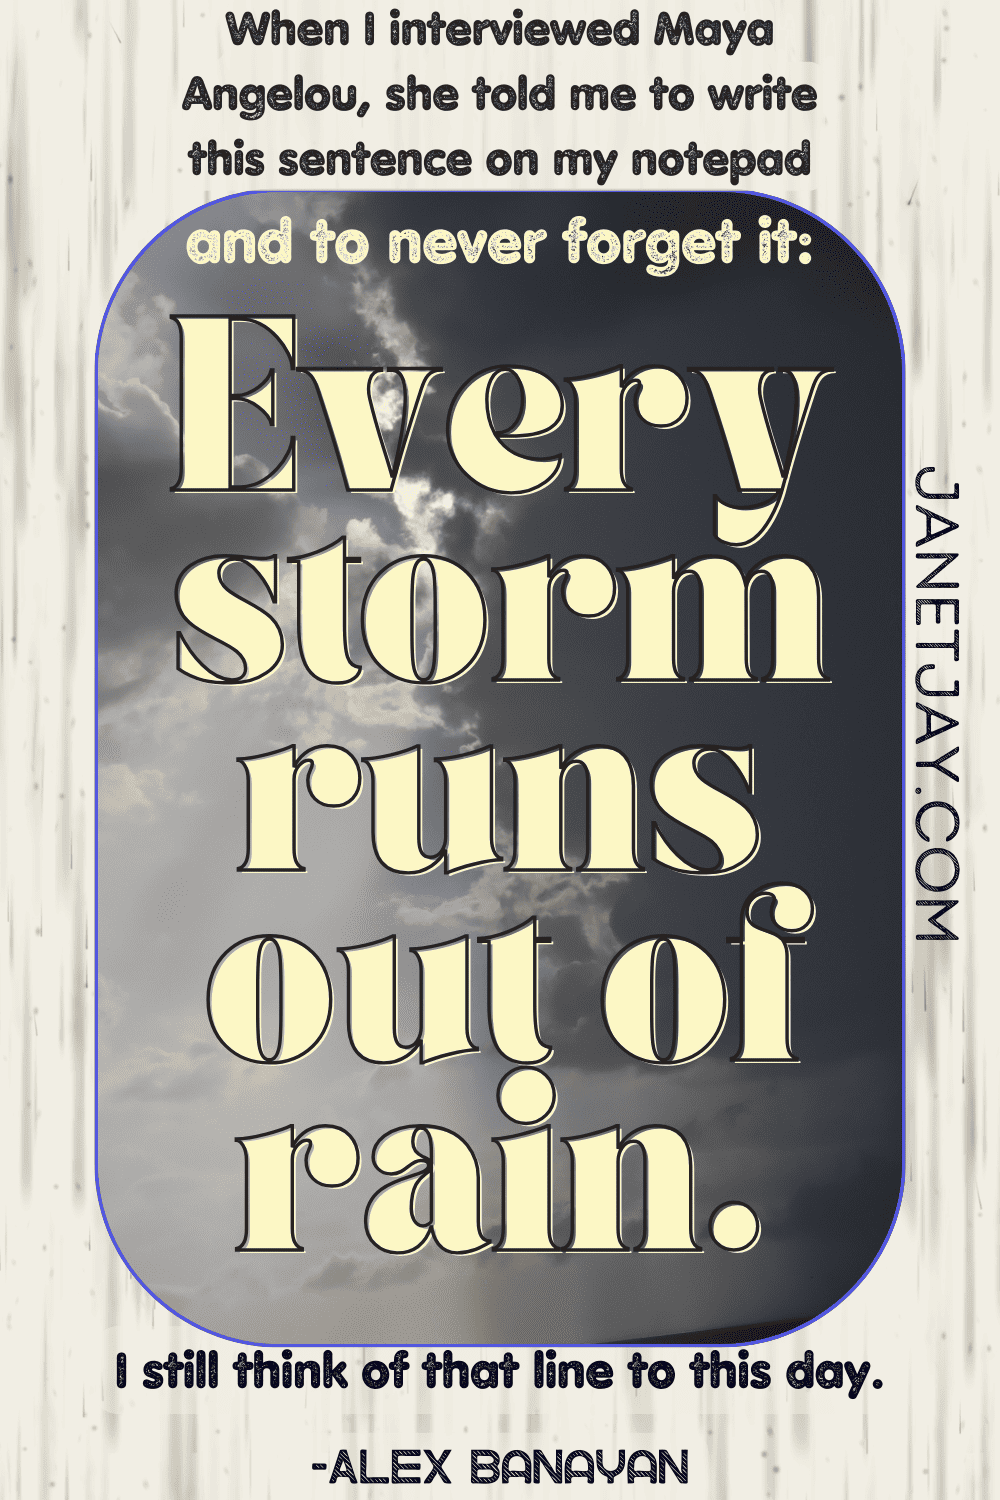 On a background of grey storm clouds, text reads "When I interviewed Maya Angelou, she told me to write this on a piece of paper and never forget it: 'Every storm runs out of rain.' I still think of that line to this day." -Alex Banayan